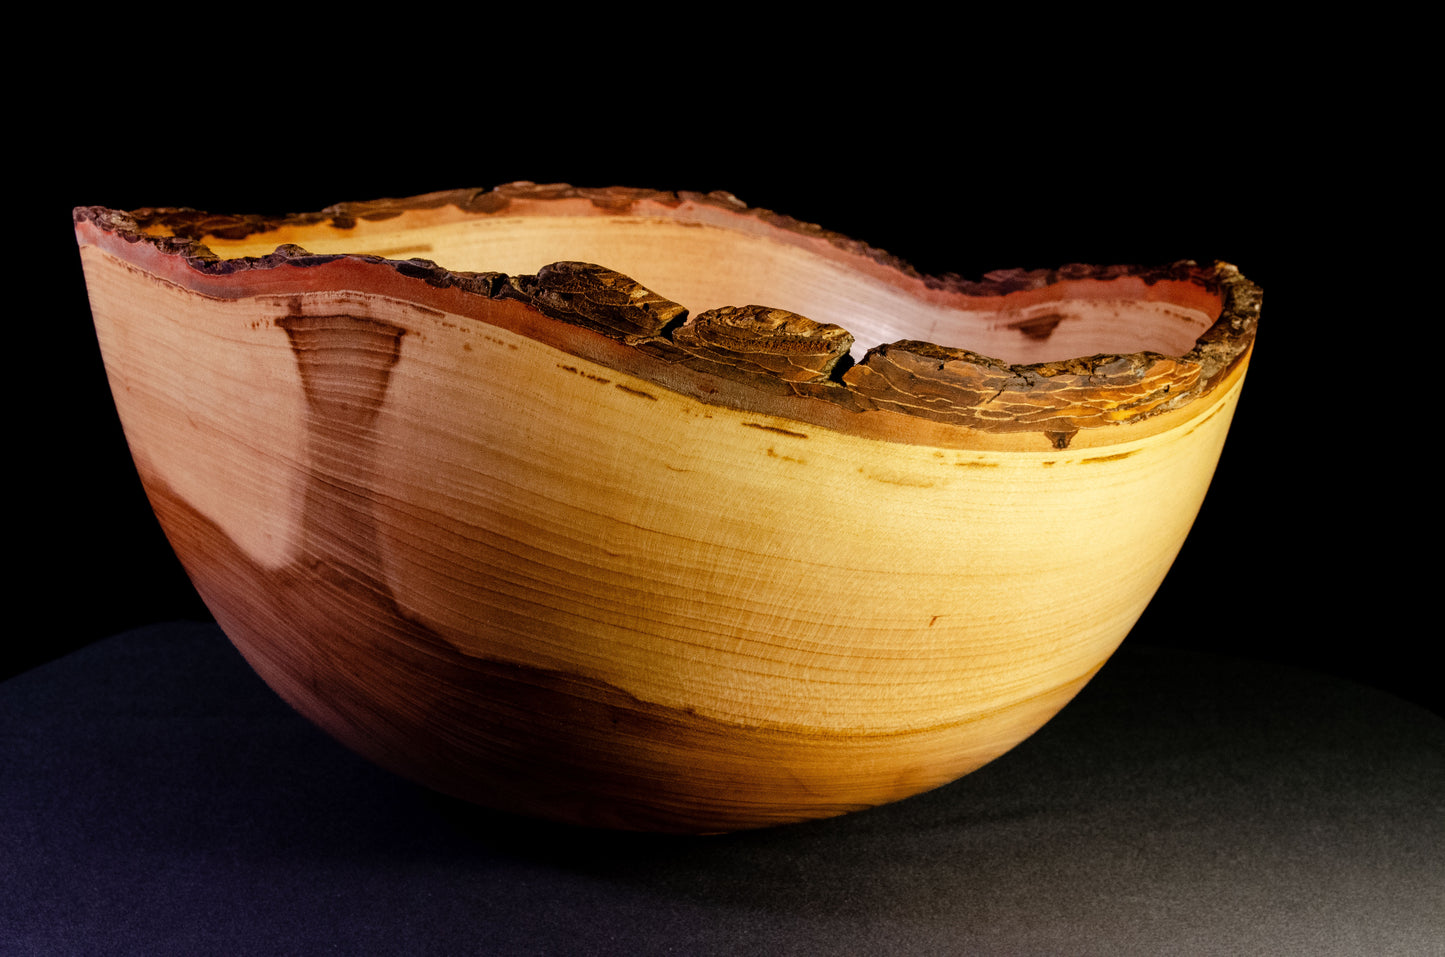 Large bowl with warm grain and bark-on natural edge. This is a family style serving bowl that would make for a stunning centerpiece or other decorative gift.